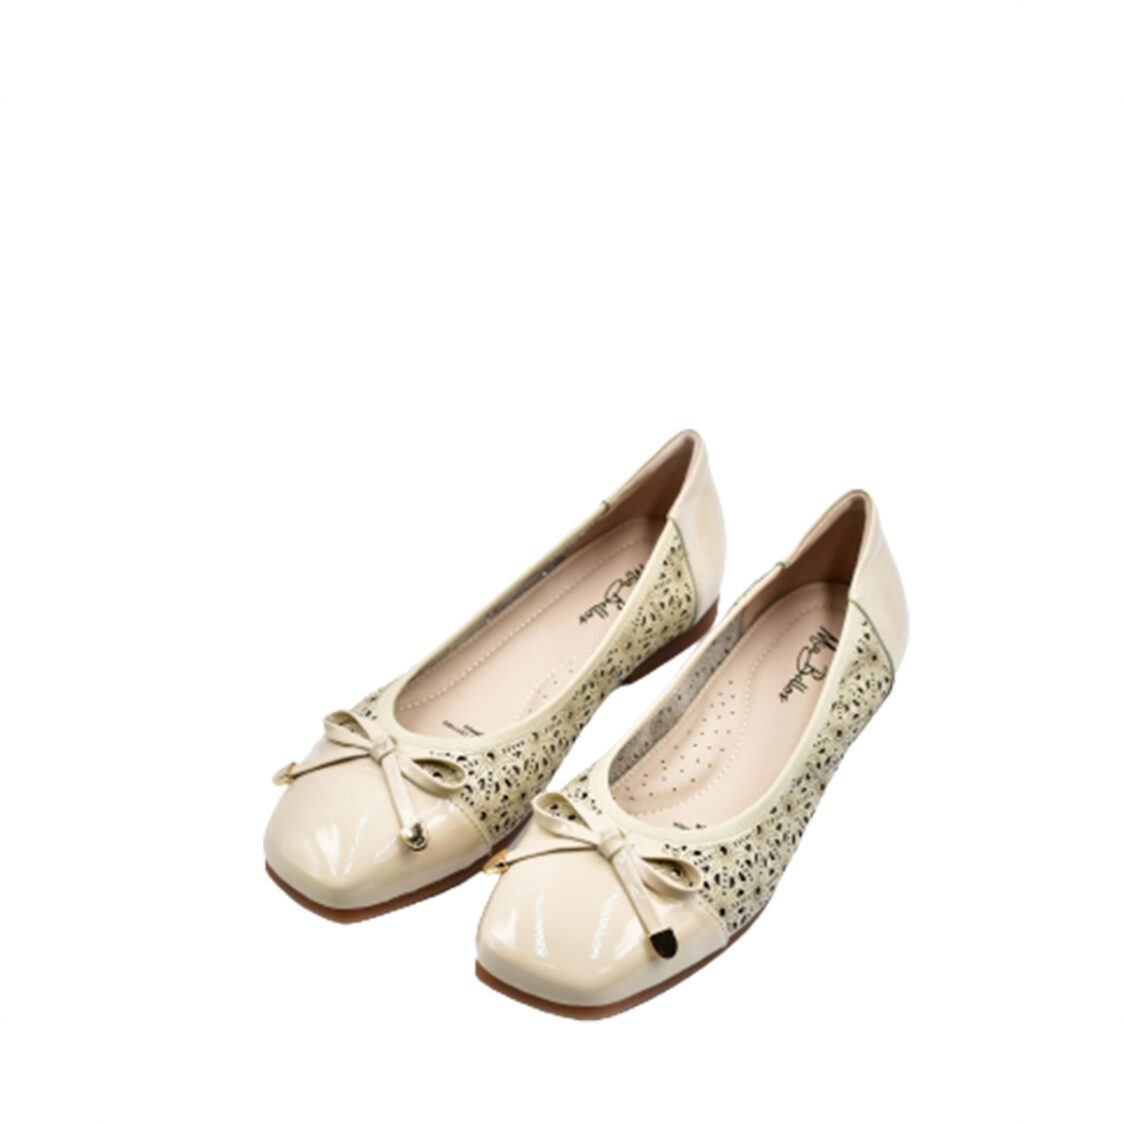 Mia Bellos Comfort Leather Shoe With Perforated Sides Beige 5036